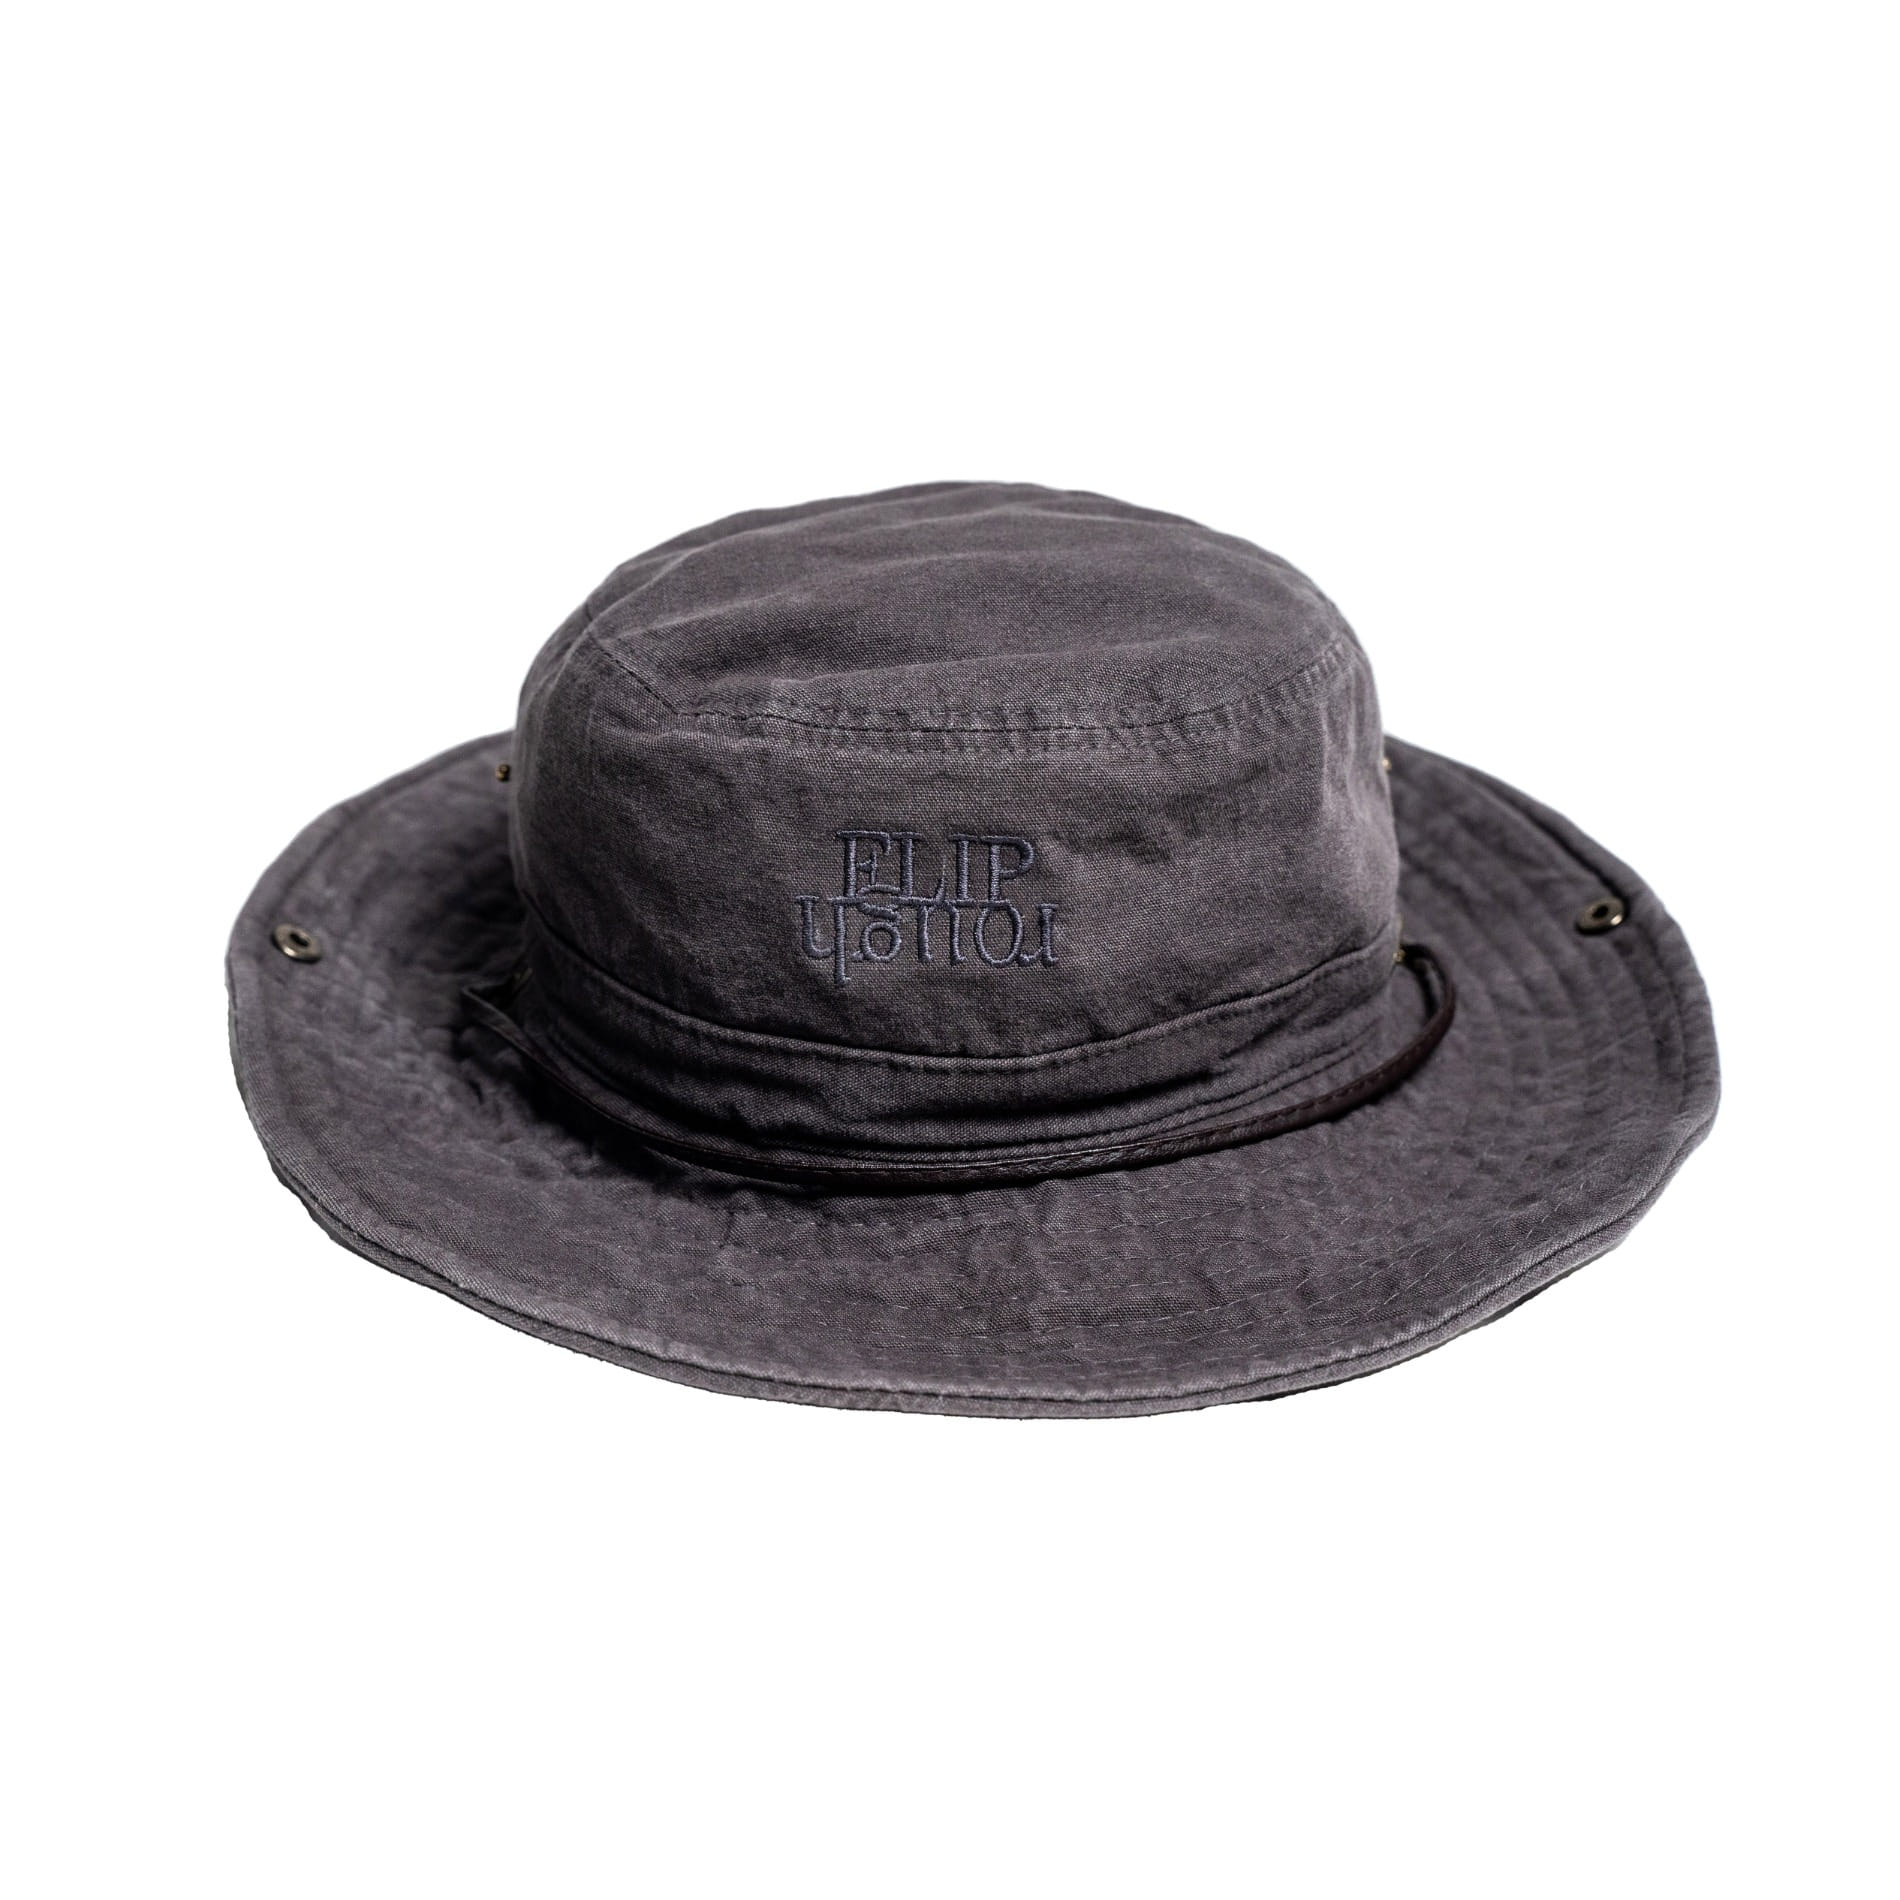 FLIPROUGH Boonie hat - Charcoal